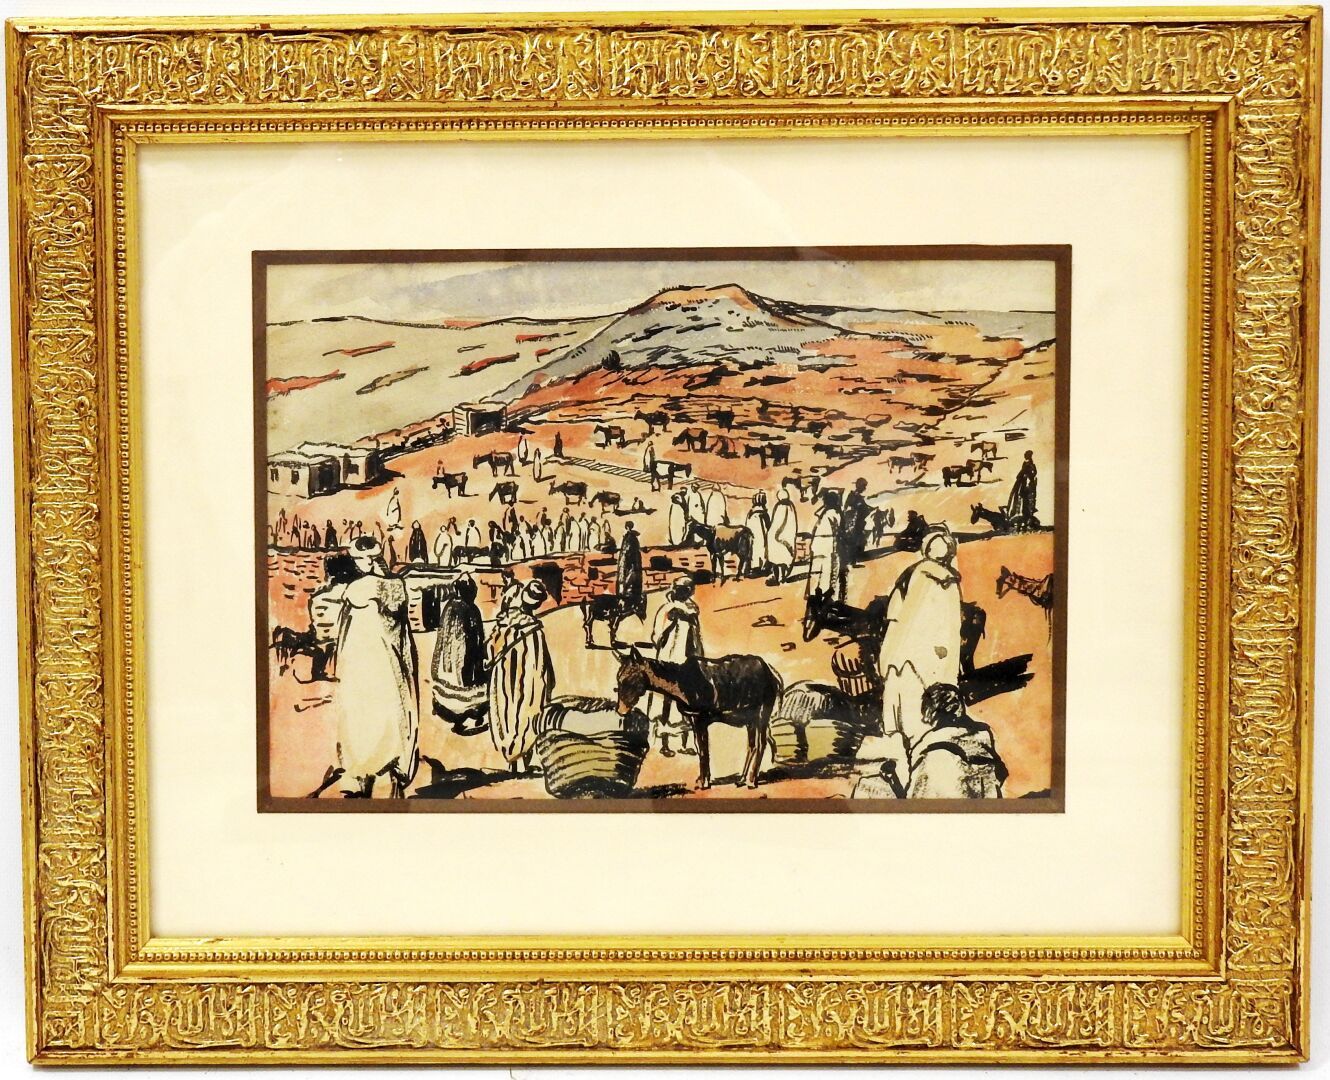 Null Emmy LEUZE-HIRSCHFELD (1884-1973) in the style of 

Berbers at the market.
&hellip;